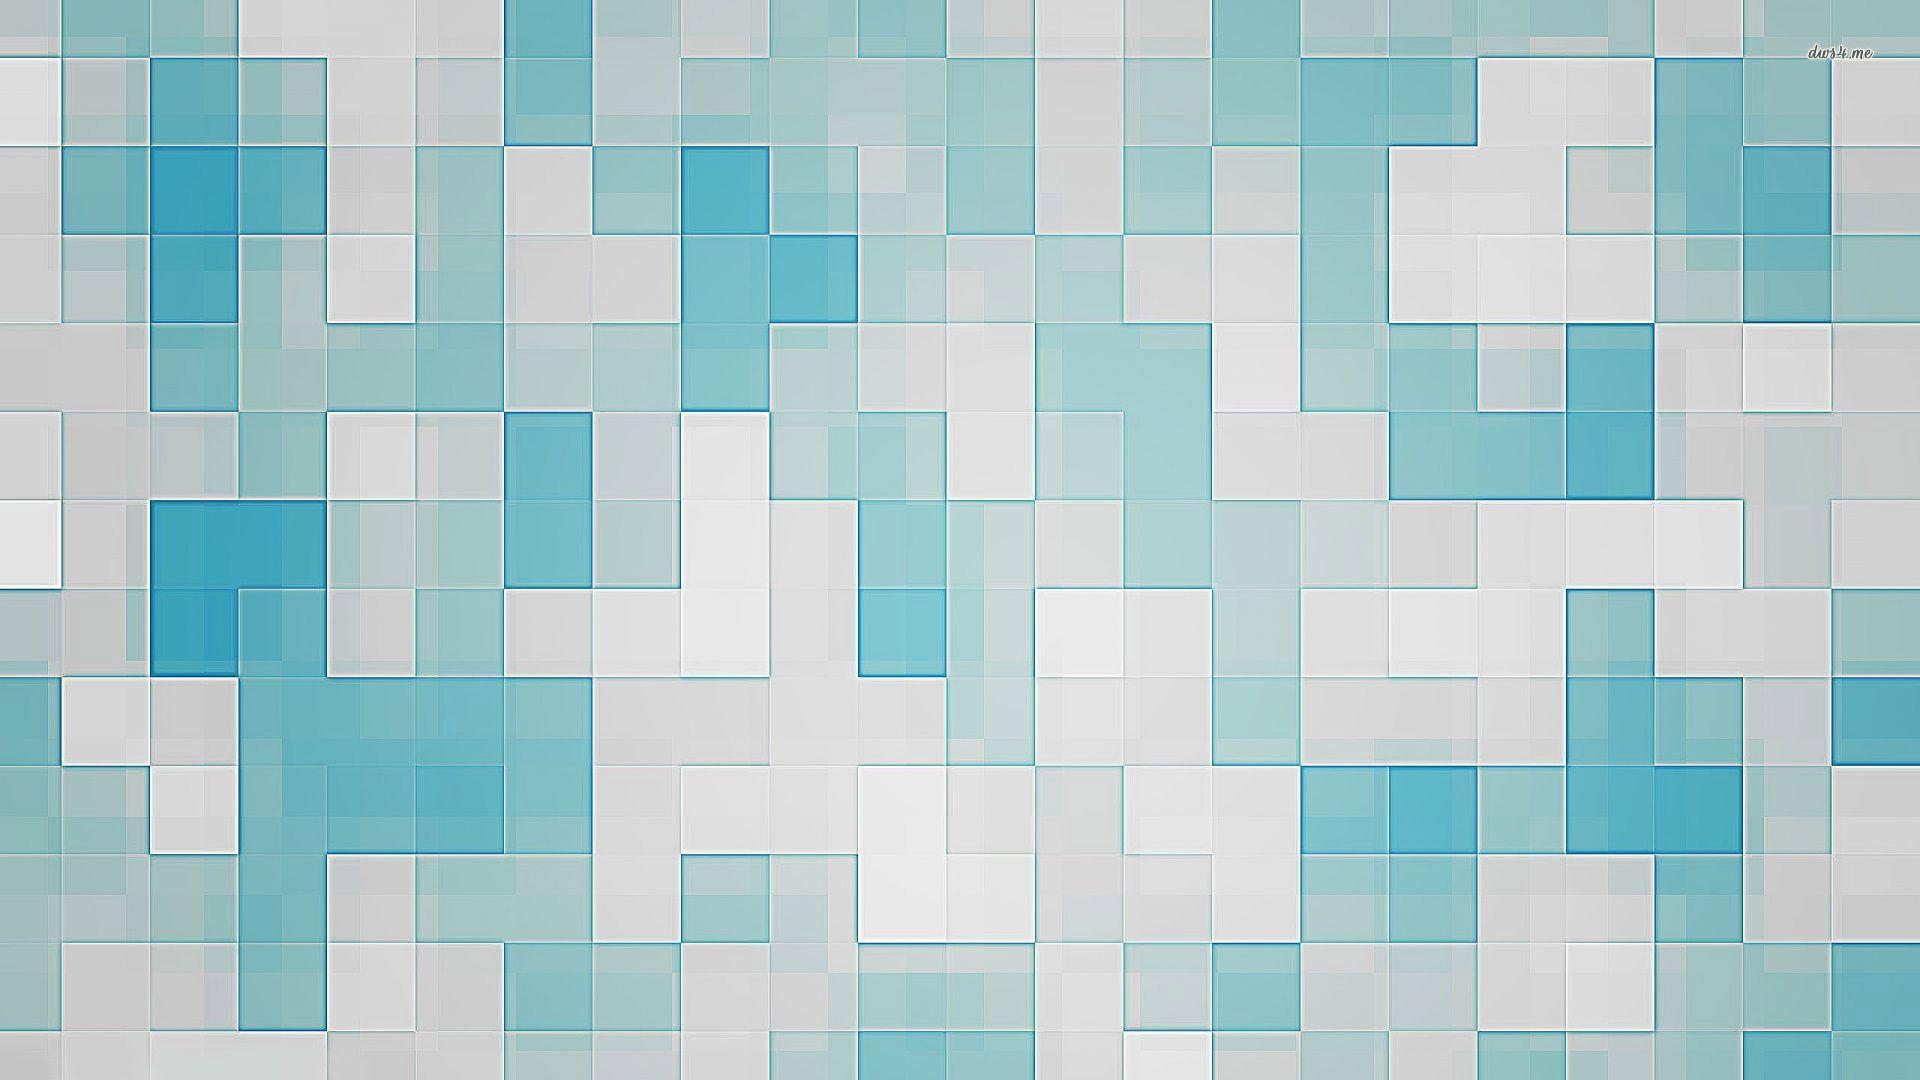 Blue and White Square Logo - 21865-blue-and-white-square-pattern-1920×1080-abstract-wallpaper.jpg ...